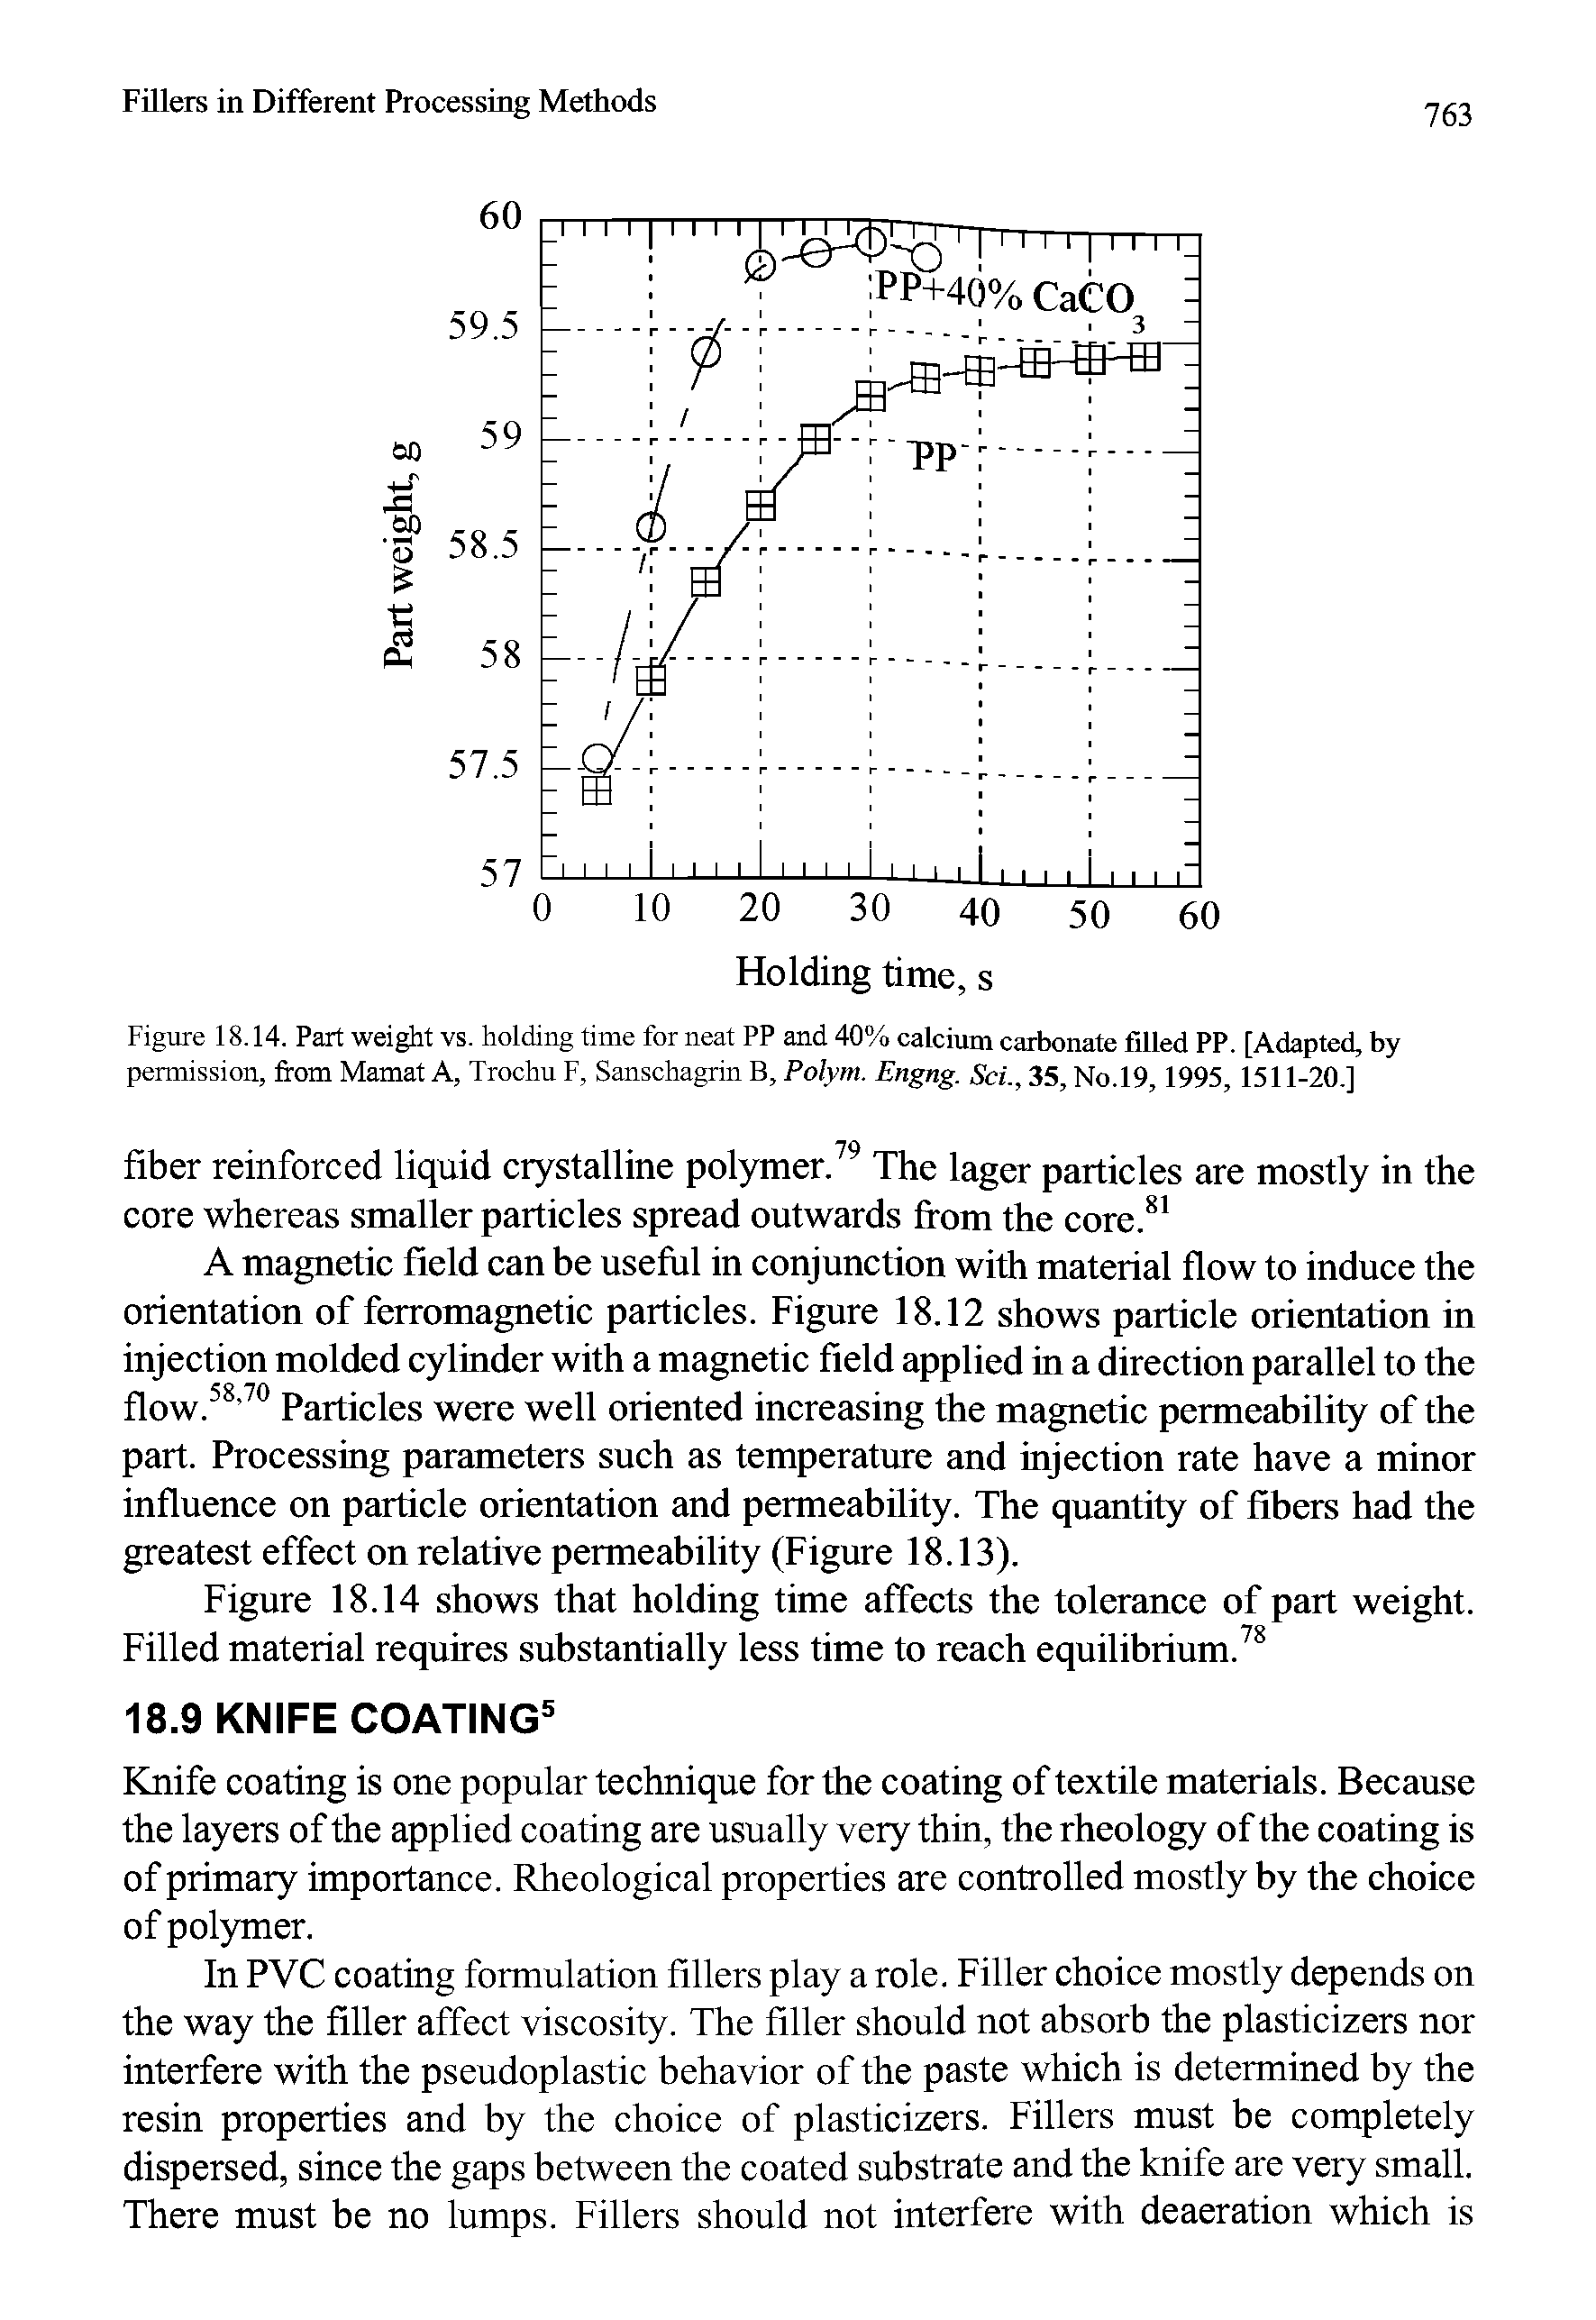 Figure 18.14. Part weight vs. holding time for neat PP and 40% calcium carbonate filled PP. [Adapted, by permission, from Mamat A, Trochu F, Sanschagrin B, Polym. Engng. Sci., 35, No. 19, 1995, 1511-20.]...